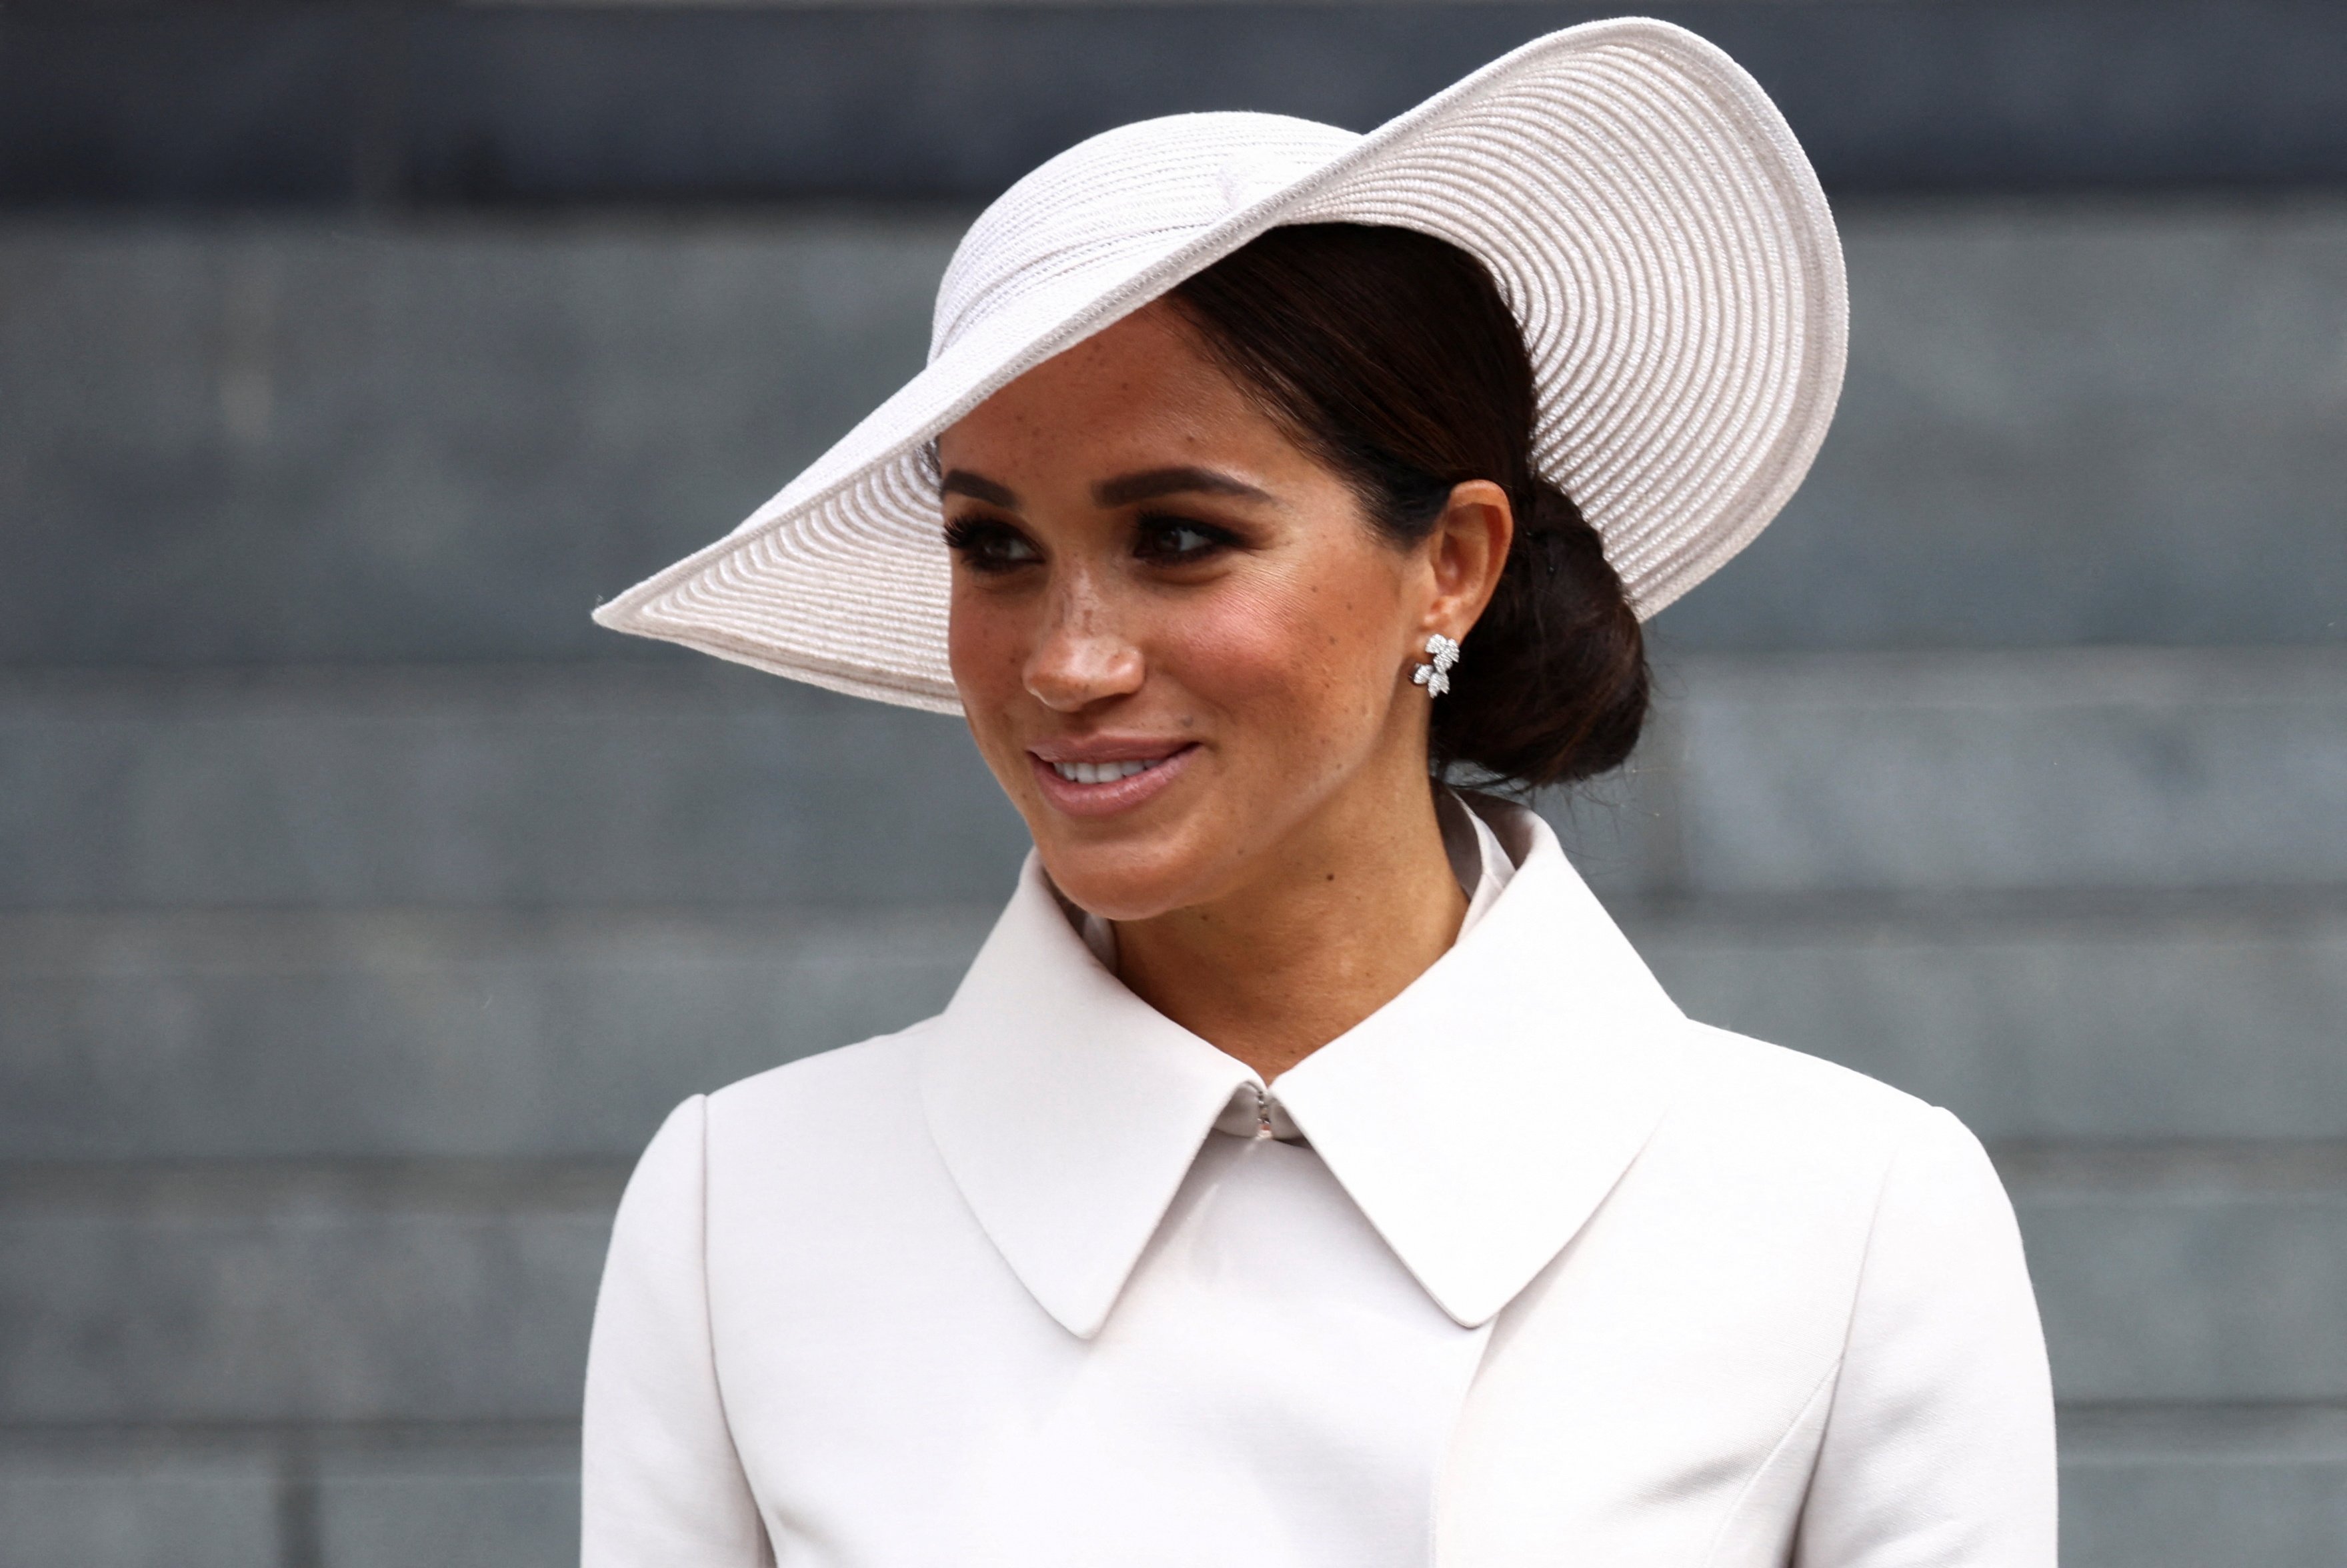 Meghan Markle, whose body language was analyzed during first appearance with the royal family, attends the National Service of Thanksgiving to Celebrate Queen Elizabeth II's Platinum Jubilee